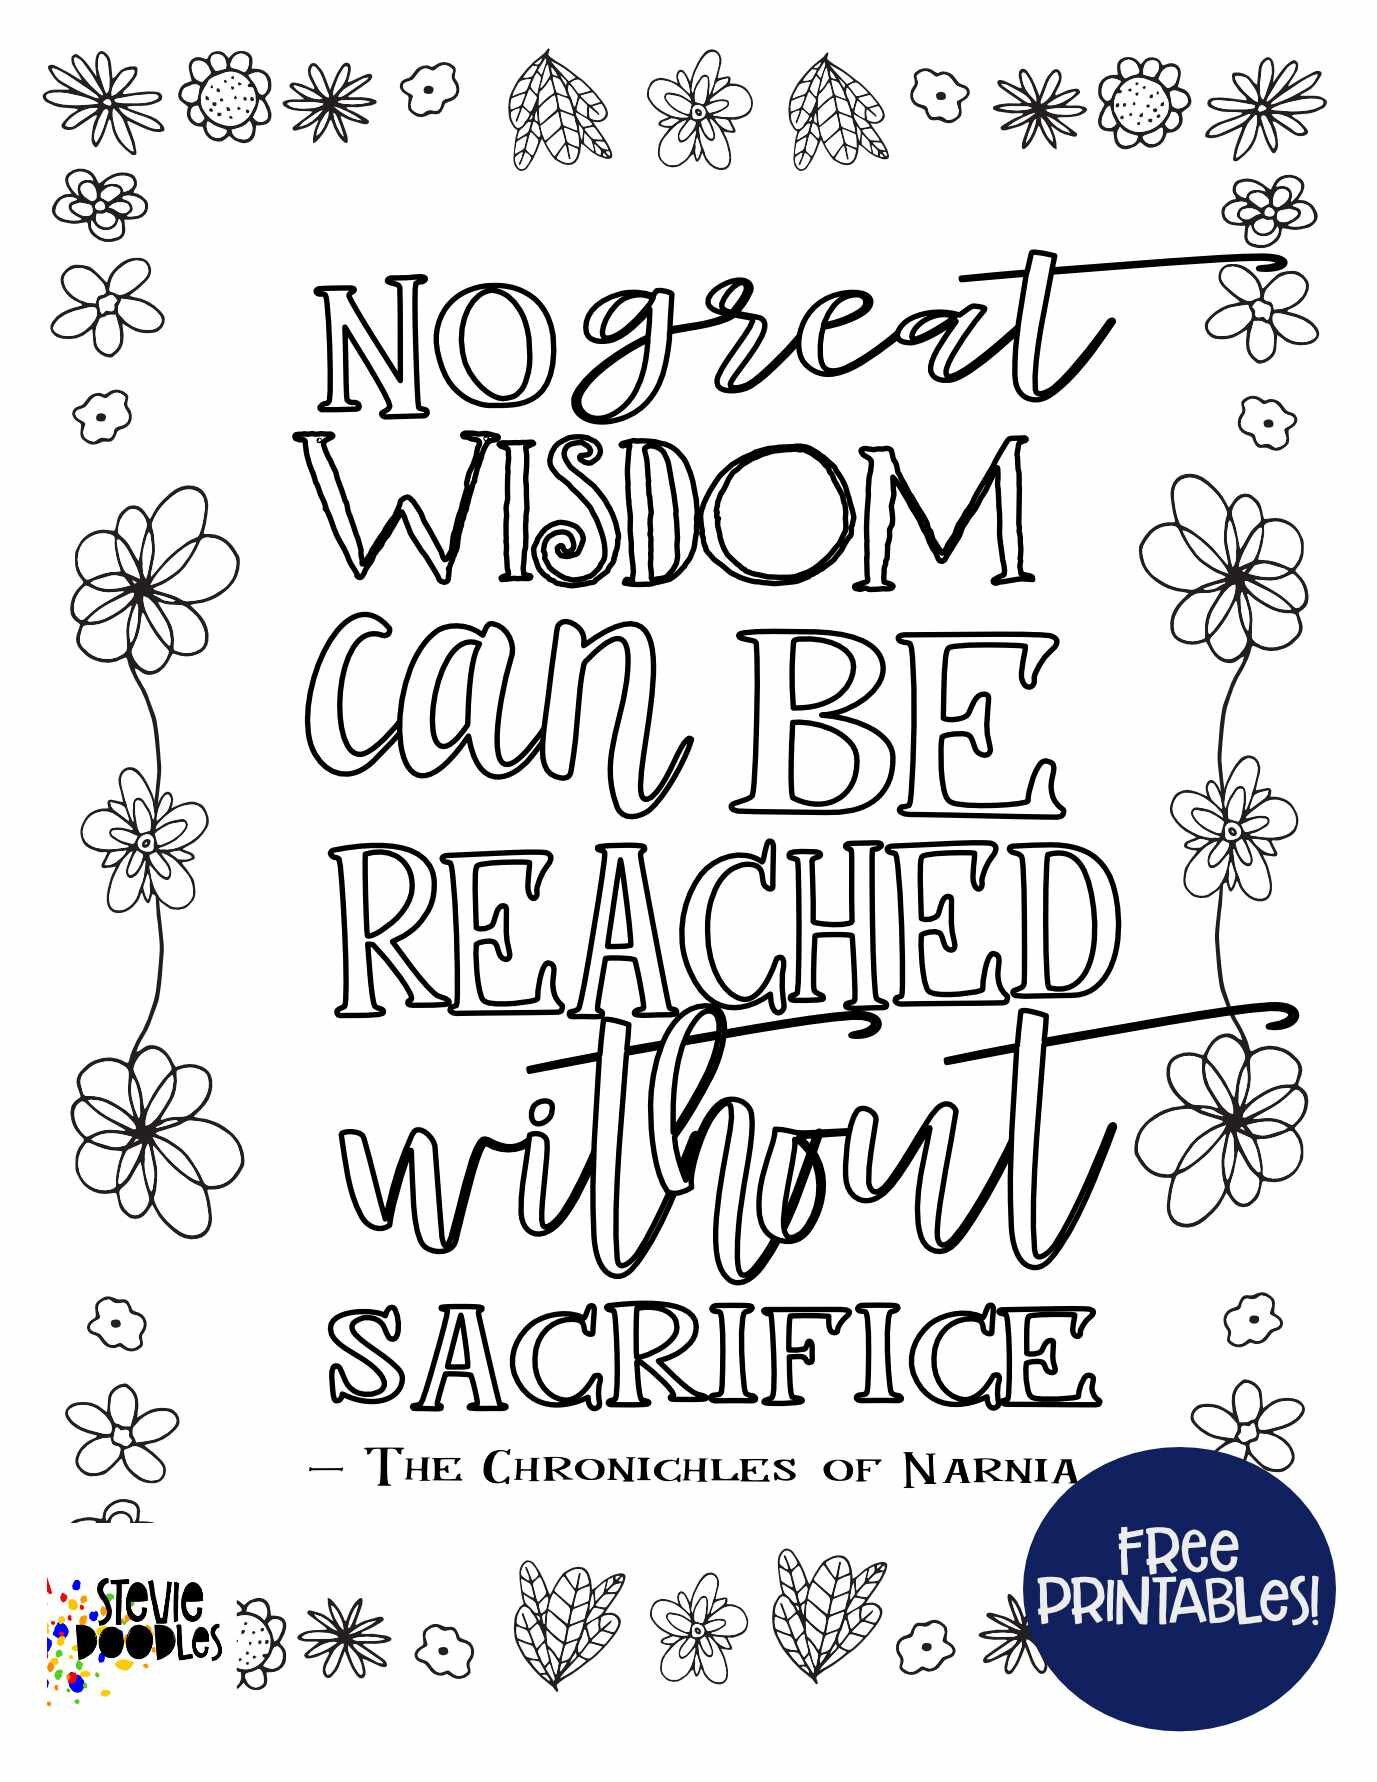 No Great Wisdom Narnia Quote free coloring page Stevie Doodles.jpg